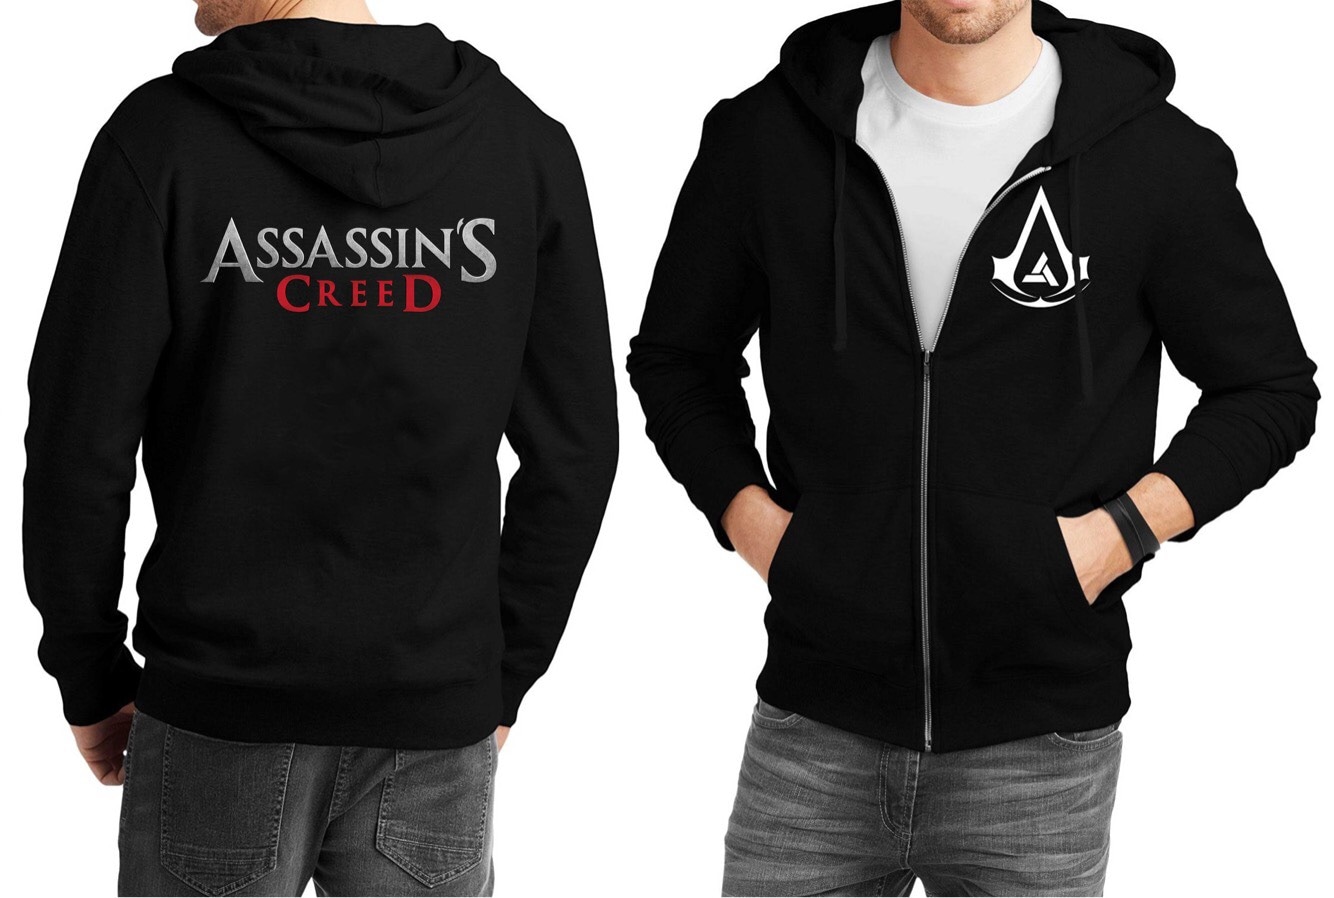 Gadgets 360's Assassin's Creed Merchandise Giveaway - Day 2